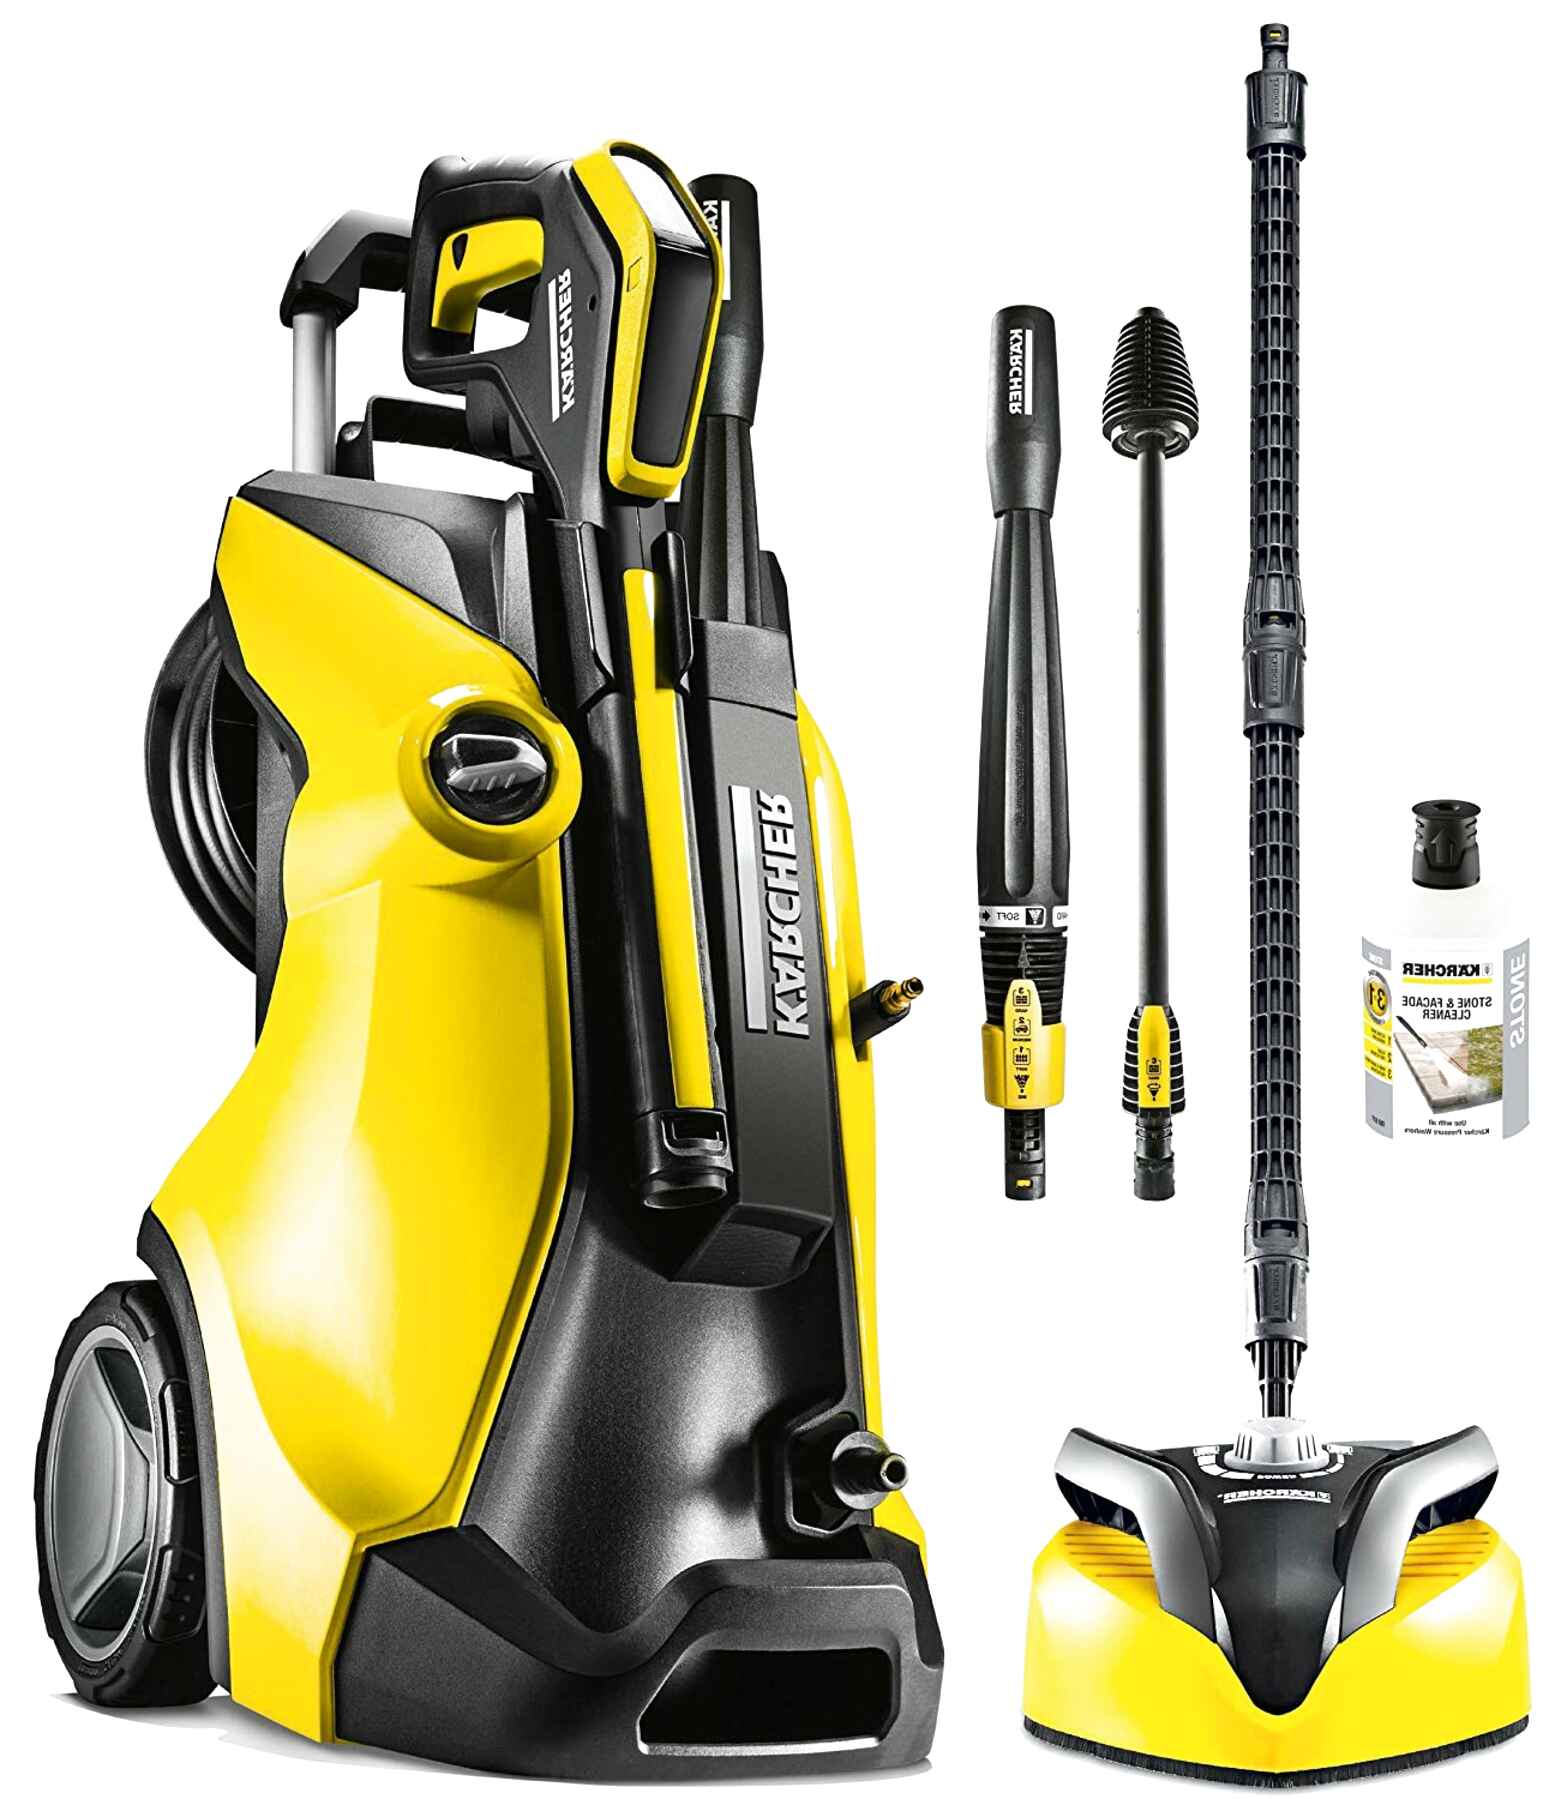 Karcher Pressure Washer K7 for sale in UK View 23 ads